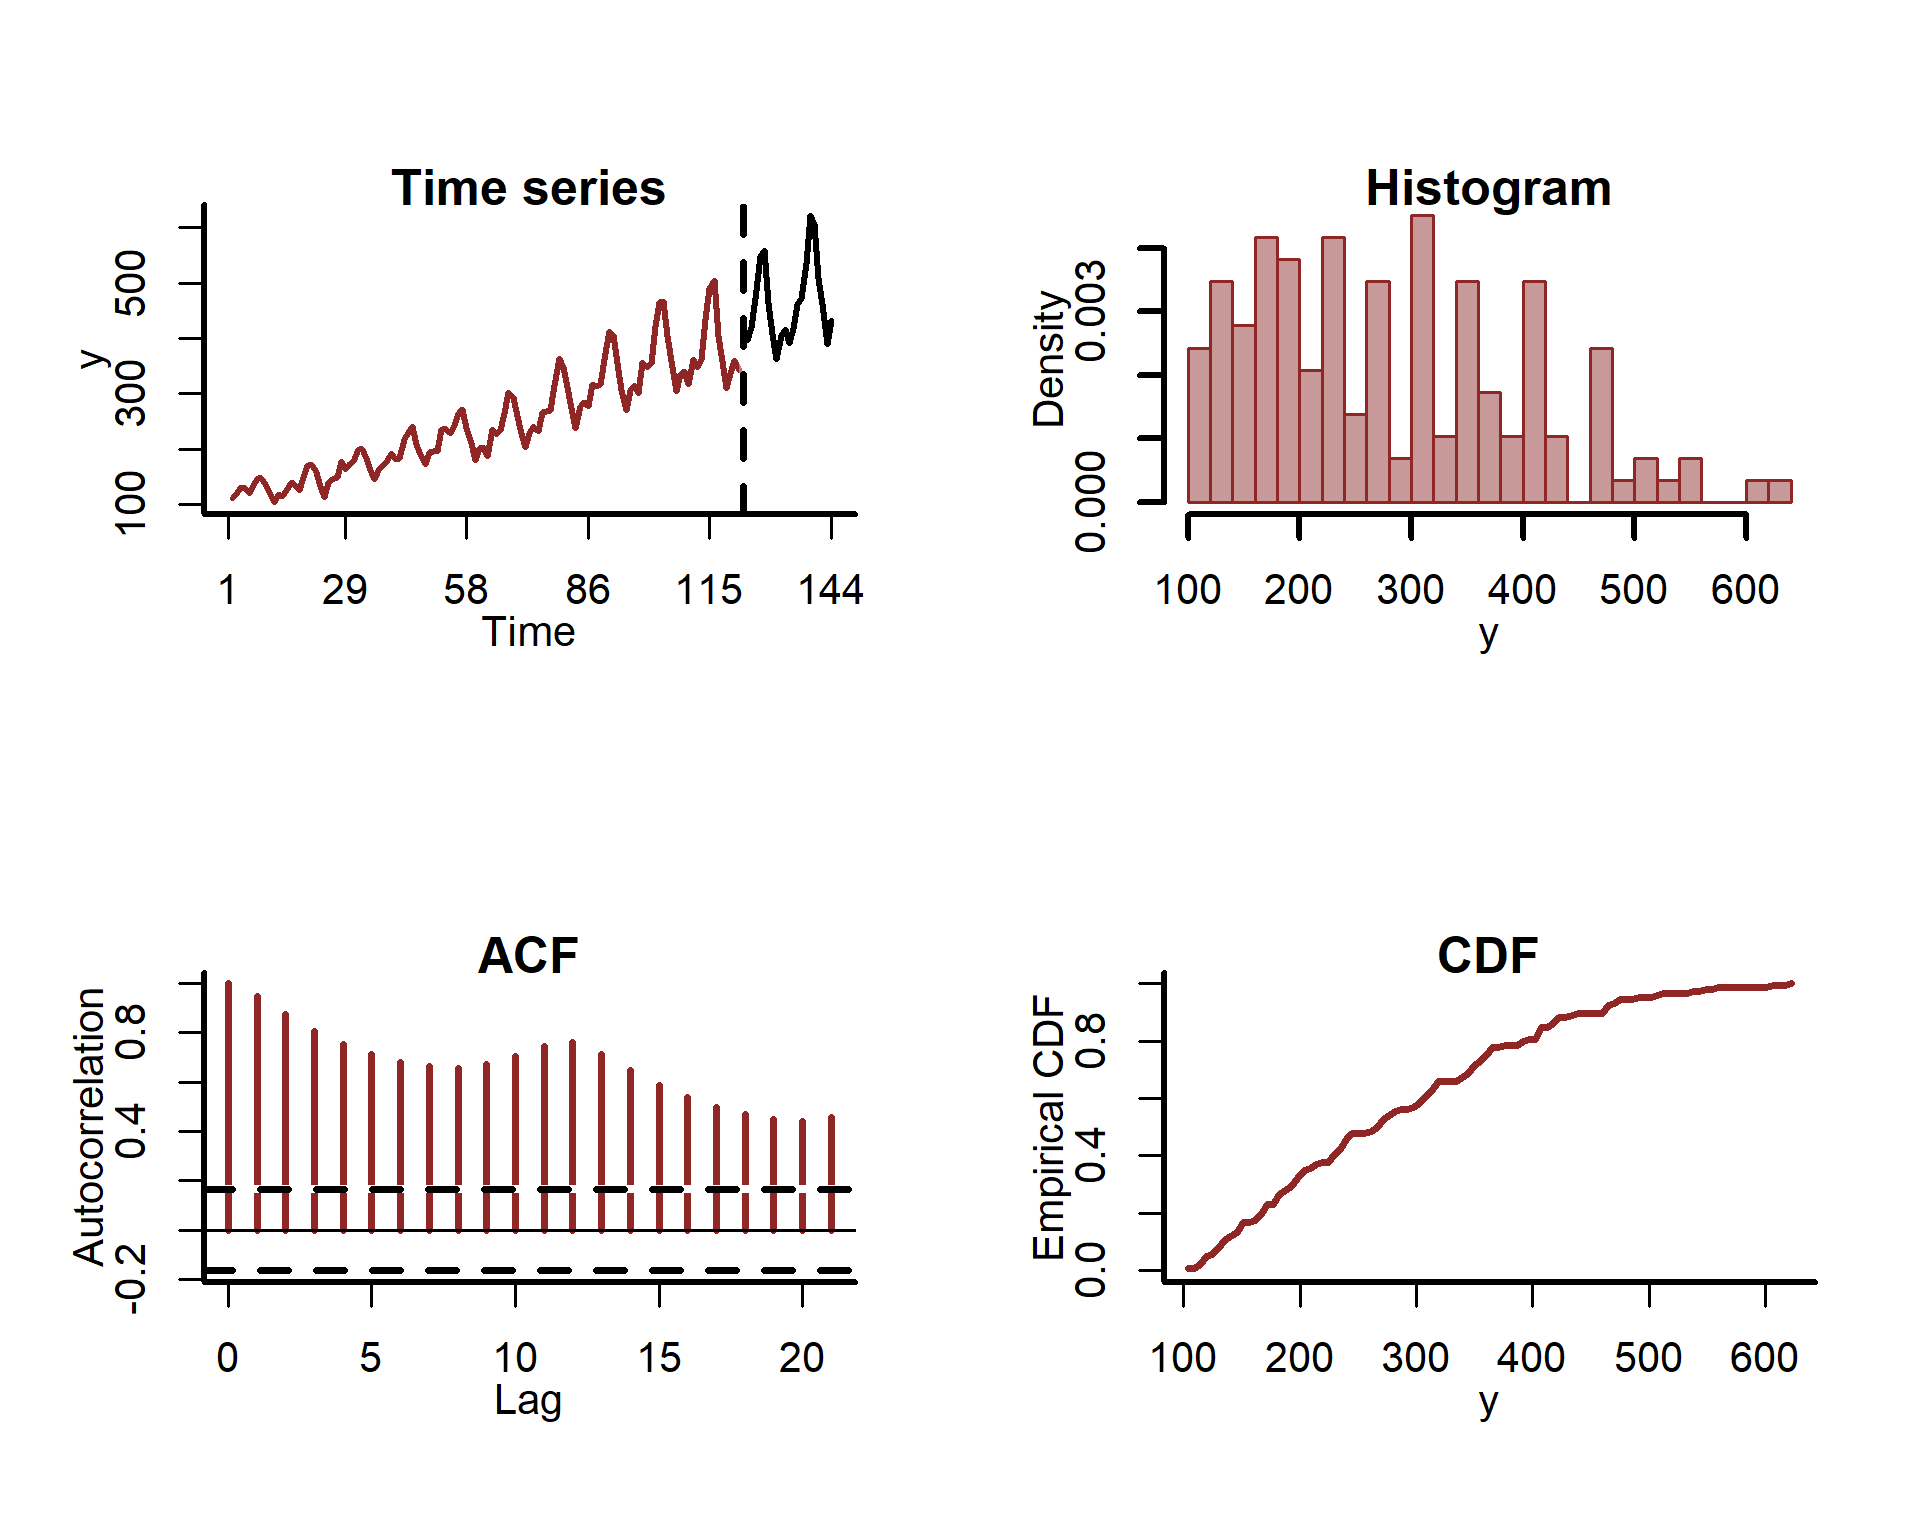 Features of the AirPassengers time series in R, including a CDF and ACF to view temporal autocorrelation